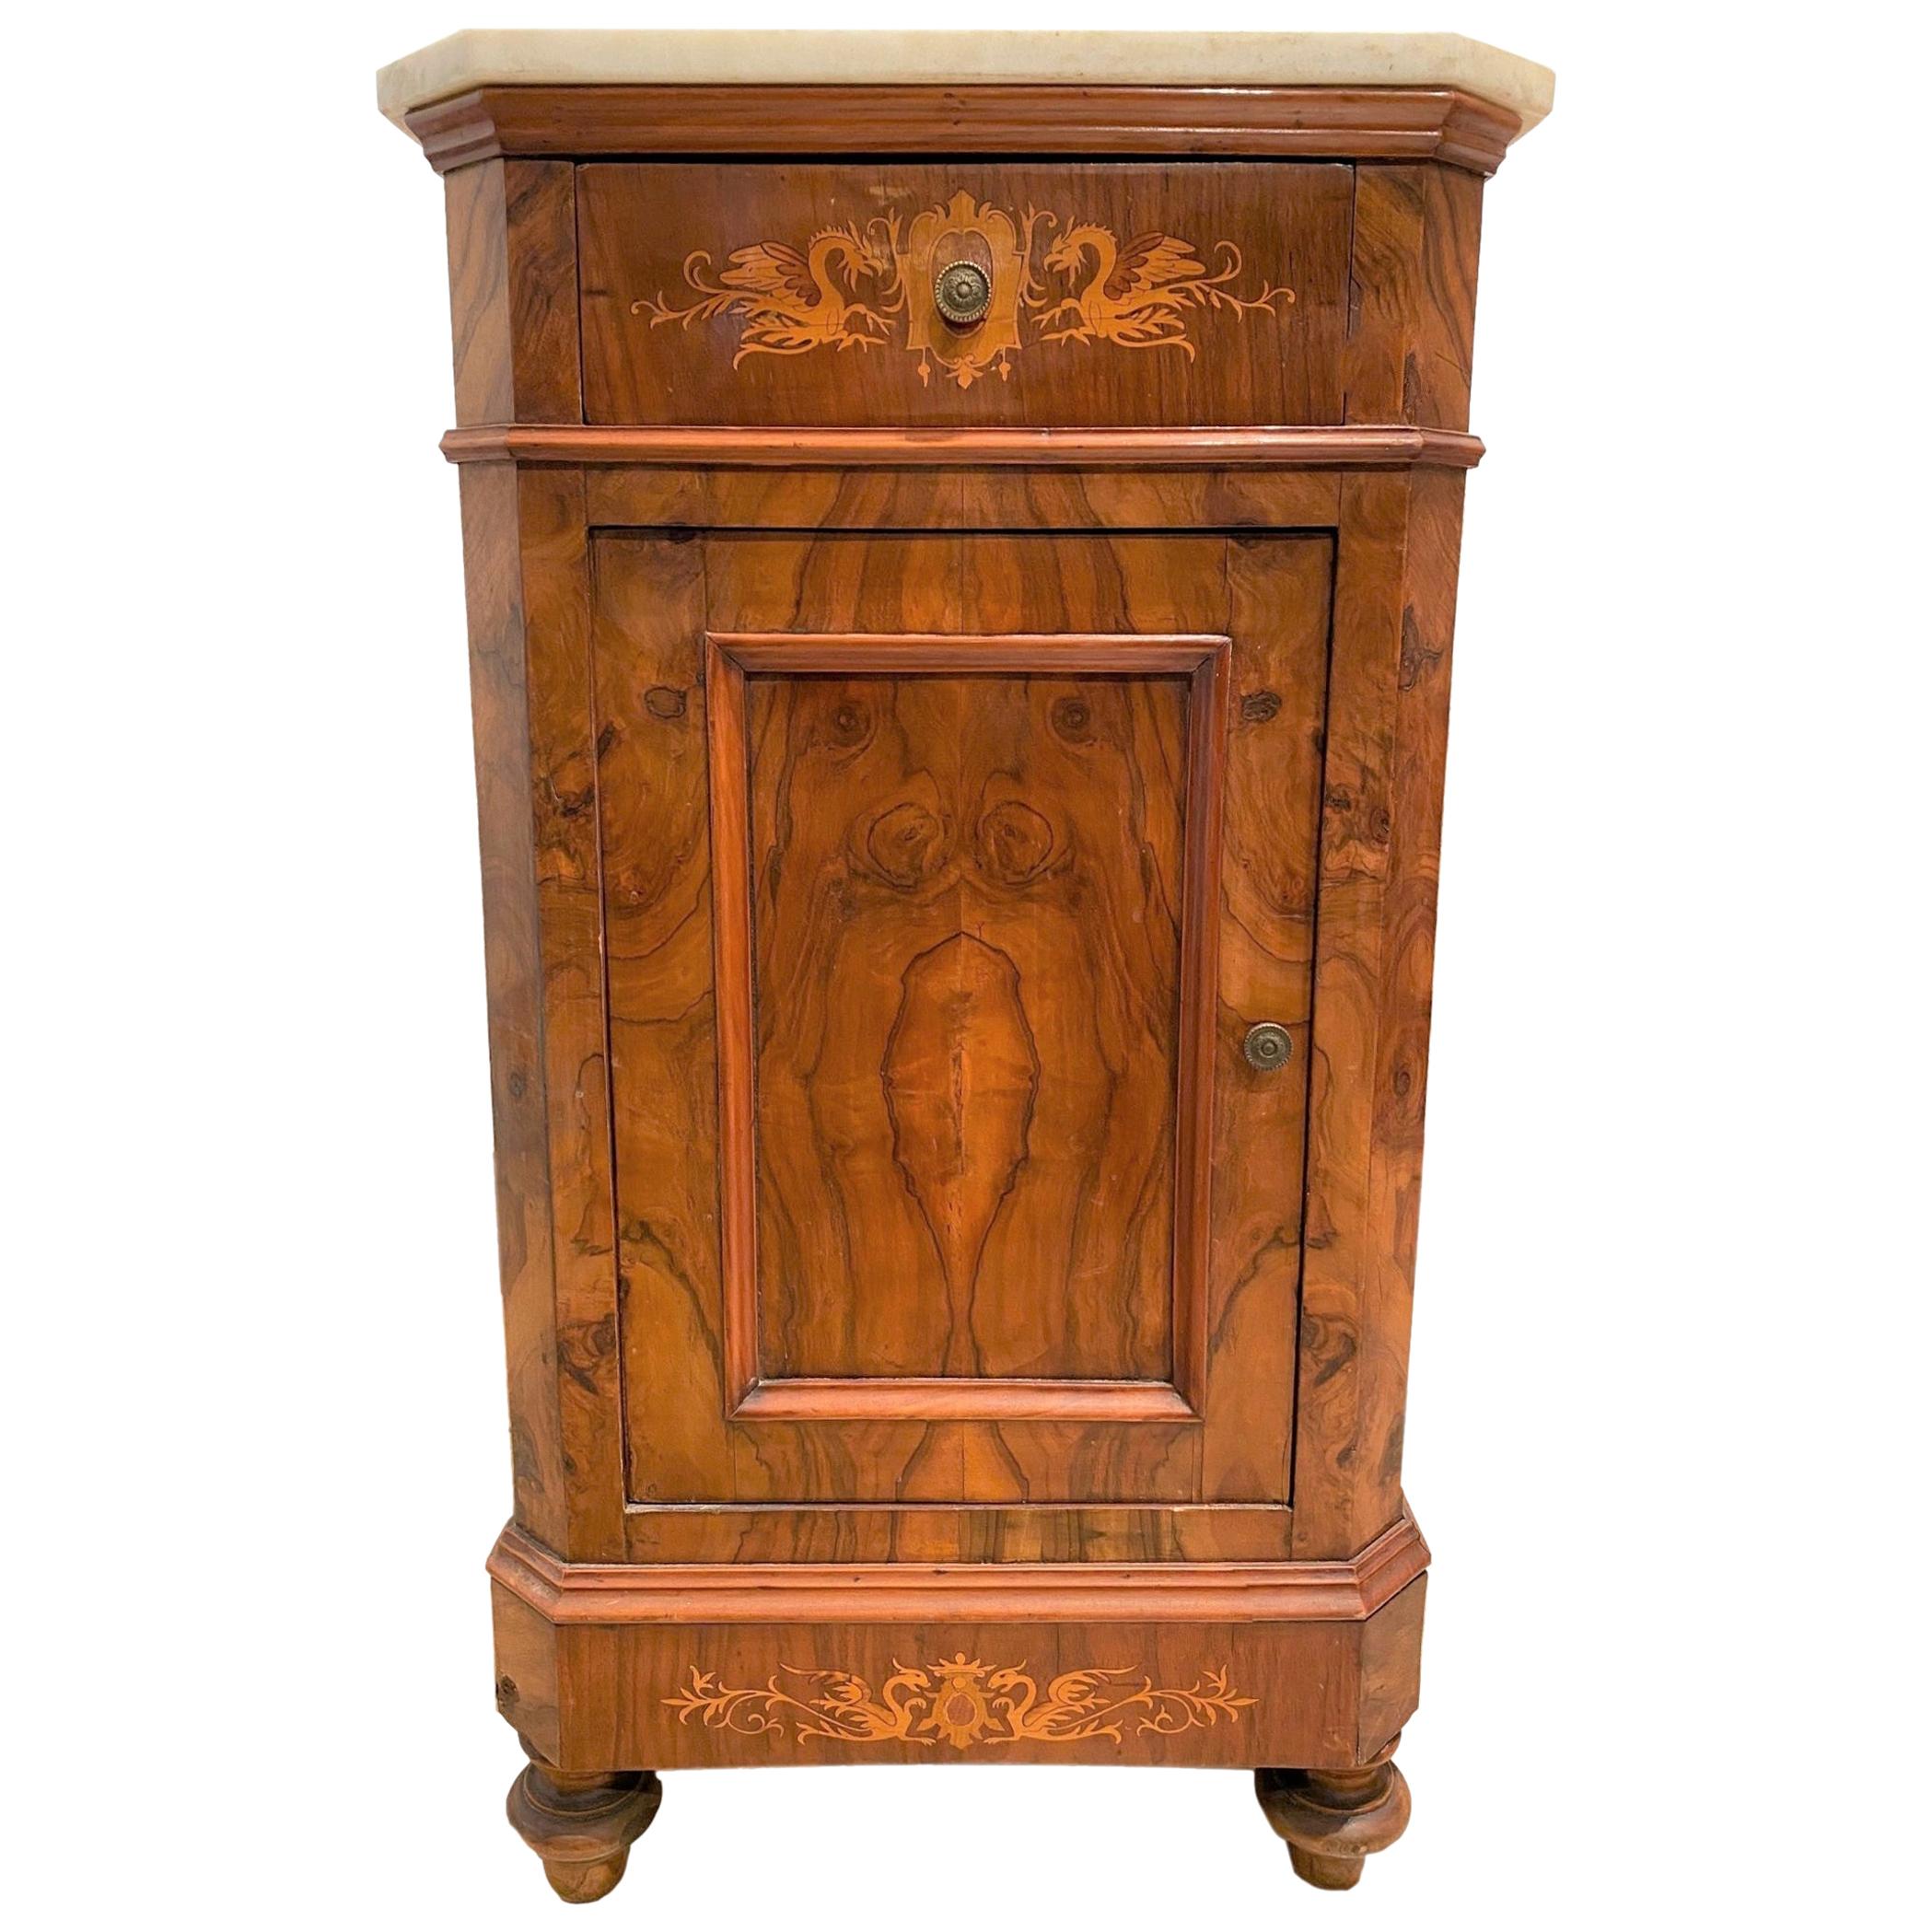 Marble-Top Side Cabinet, Figured Burl Walnut with Marquetry Inlay, Italian, 1880